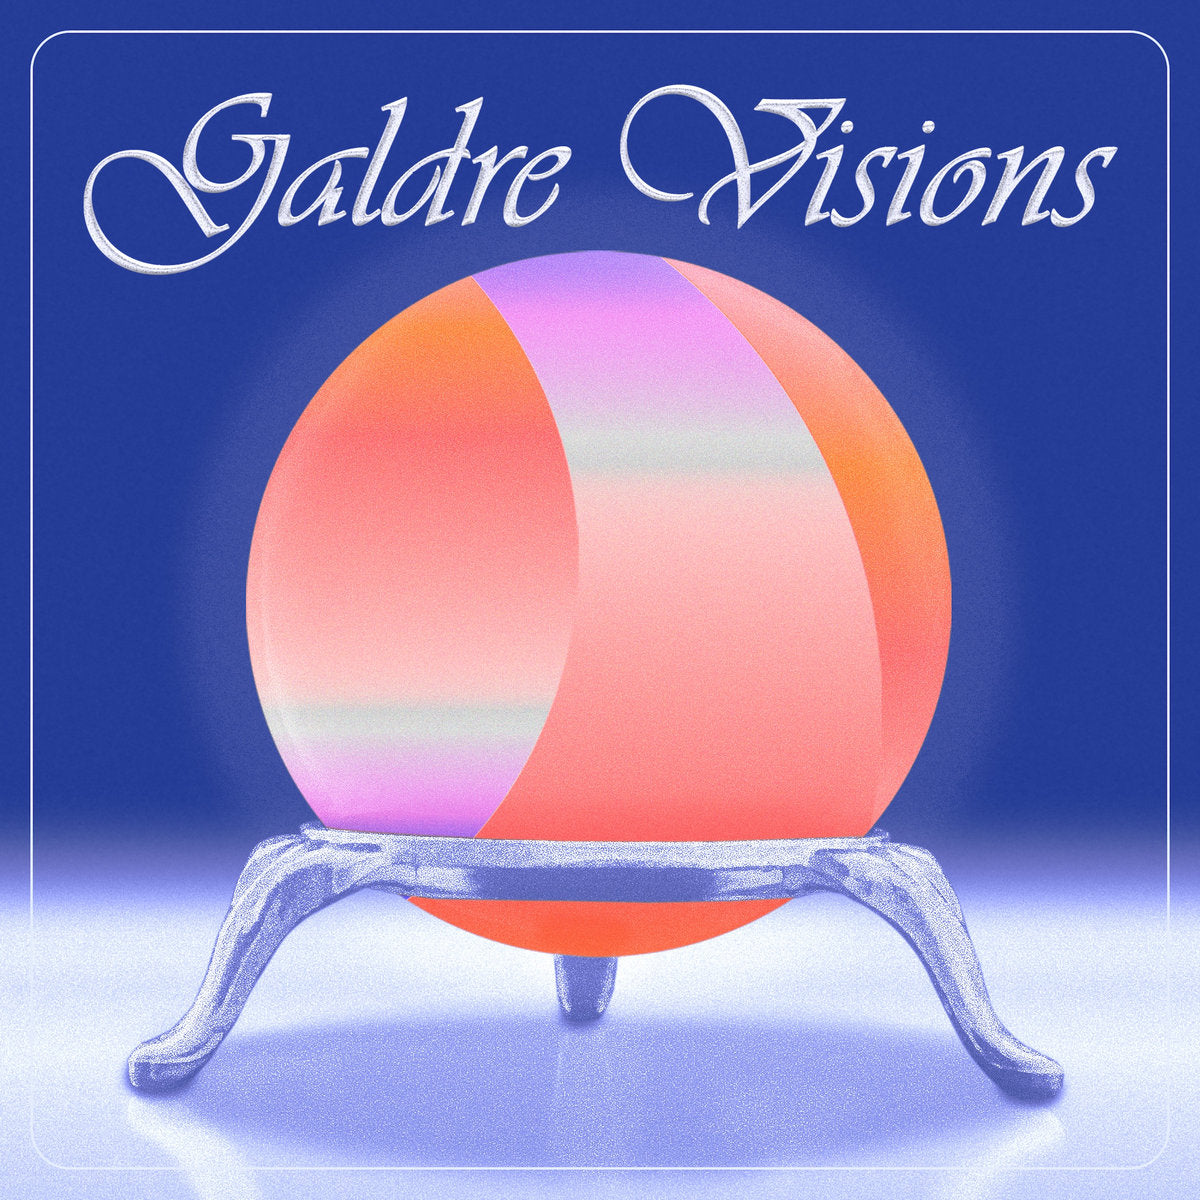 Galdre Visions (New LP)